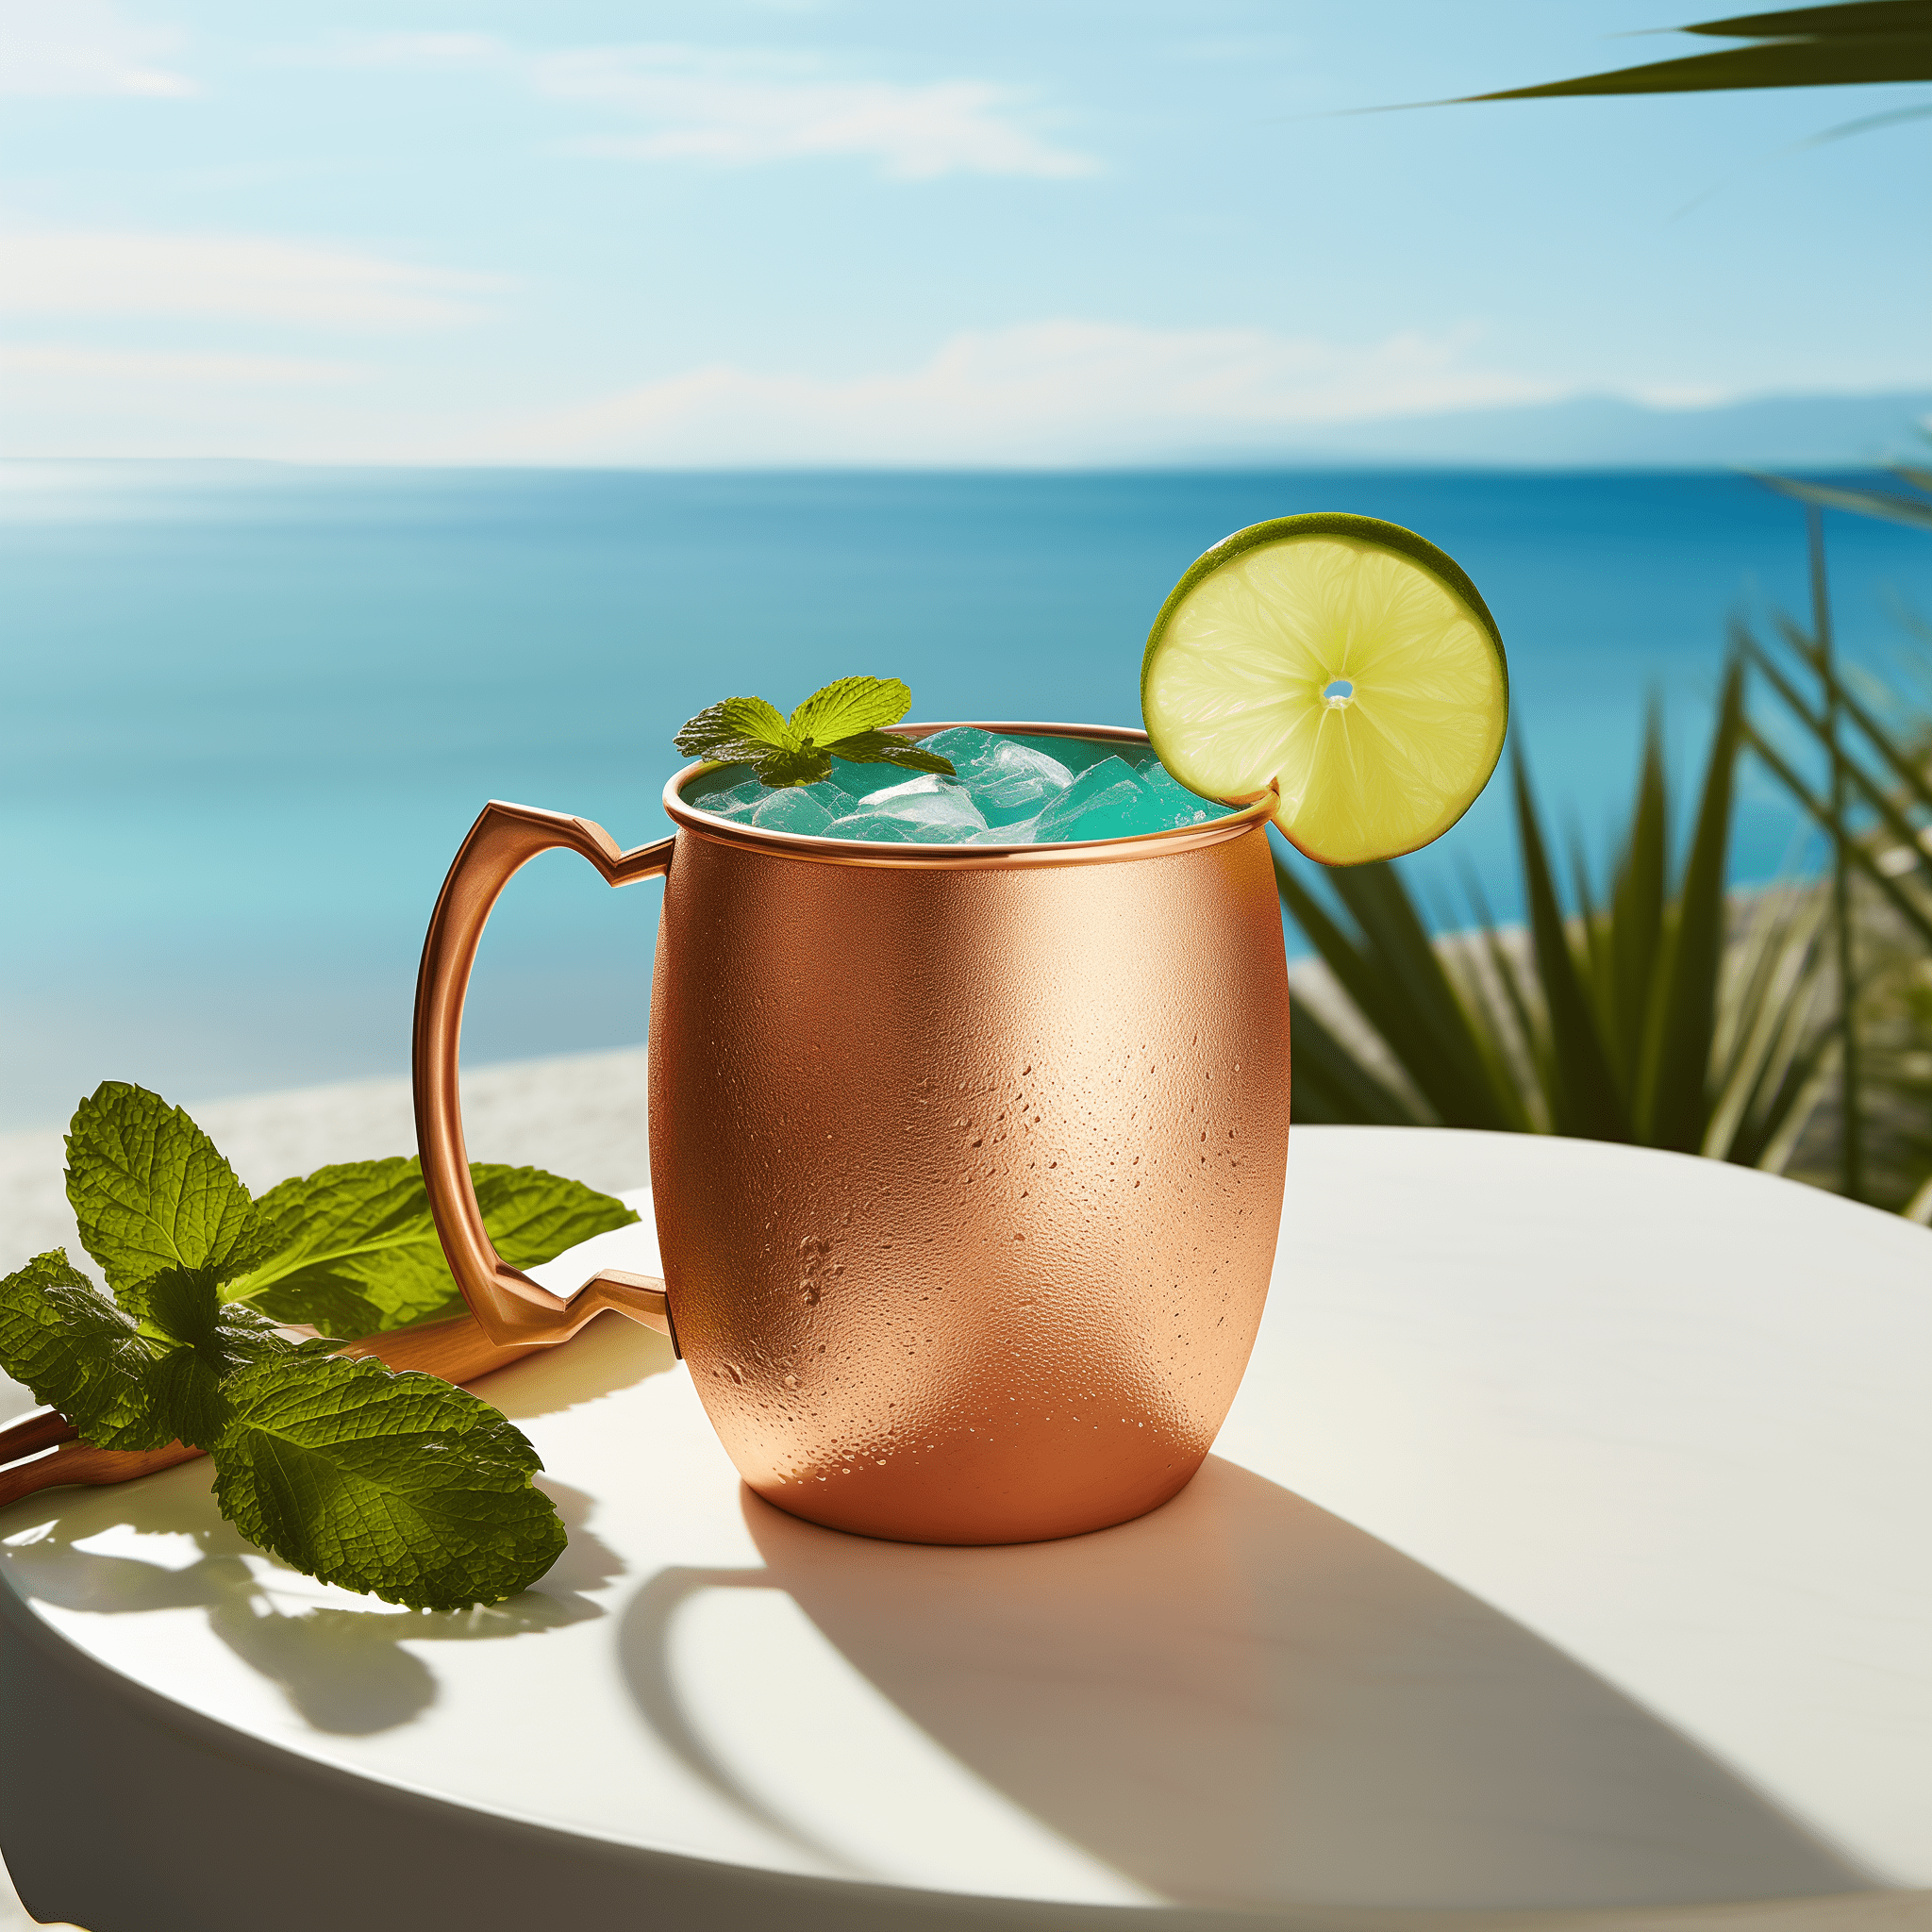 Blue Mule Cocktail Recipe - The Blue Mule offers a refreshing, slightly spicy and citrusy flavor profile with a subtle sweetness. The ginger beer provides a zesty kick, while the blue curaçao adds a unique orangey twist and a hint of tropical fruitiness.